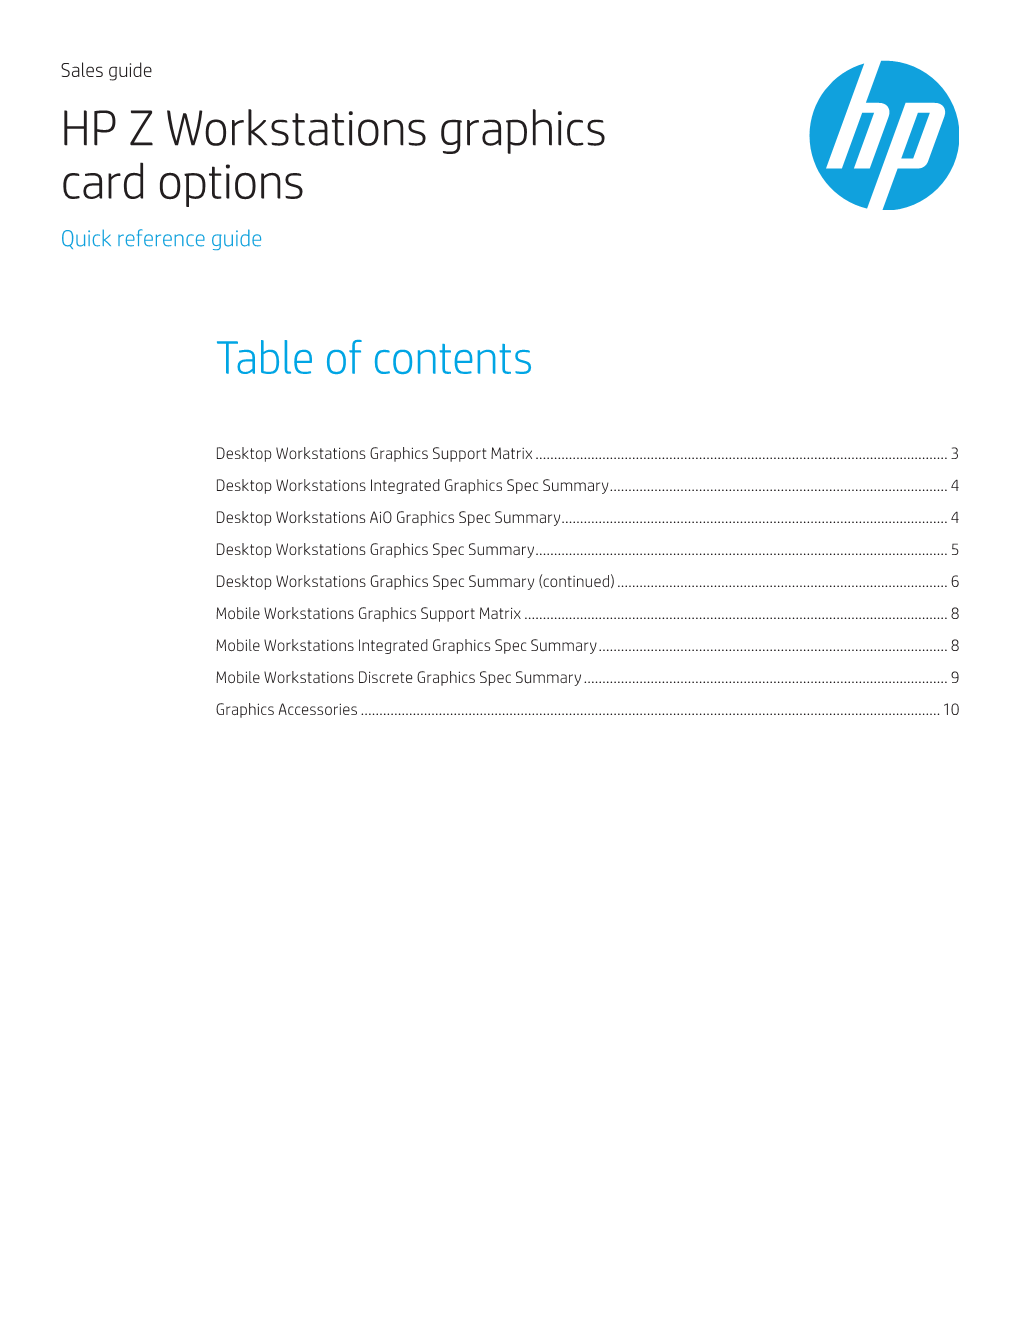 HP Z Workstations Graphics Card Options Quick Reference Guide